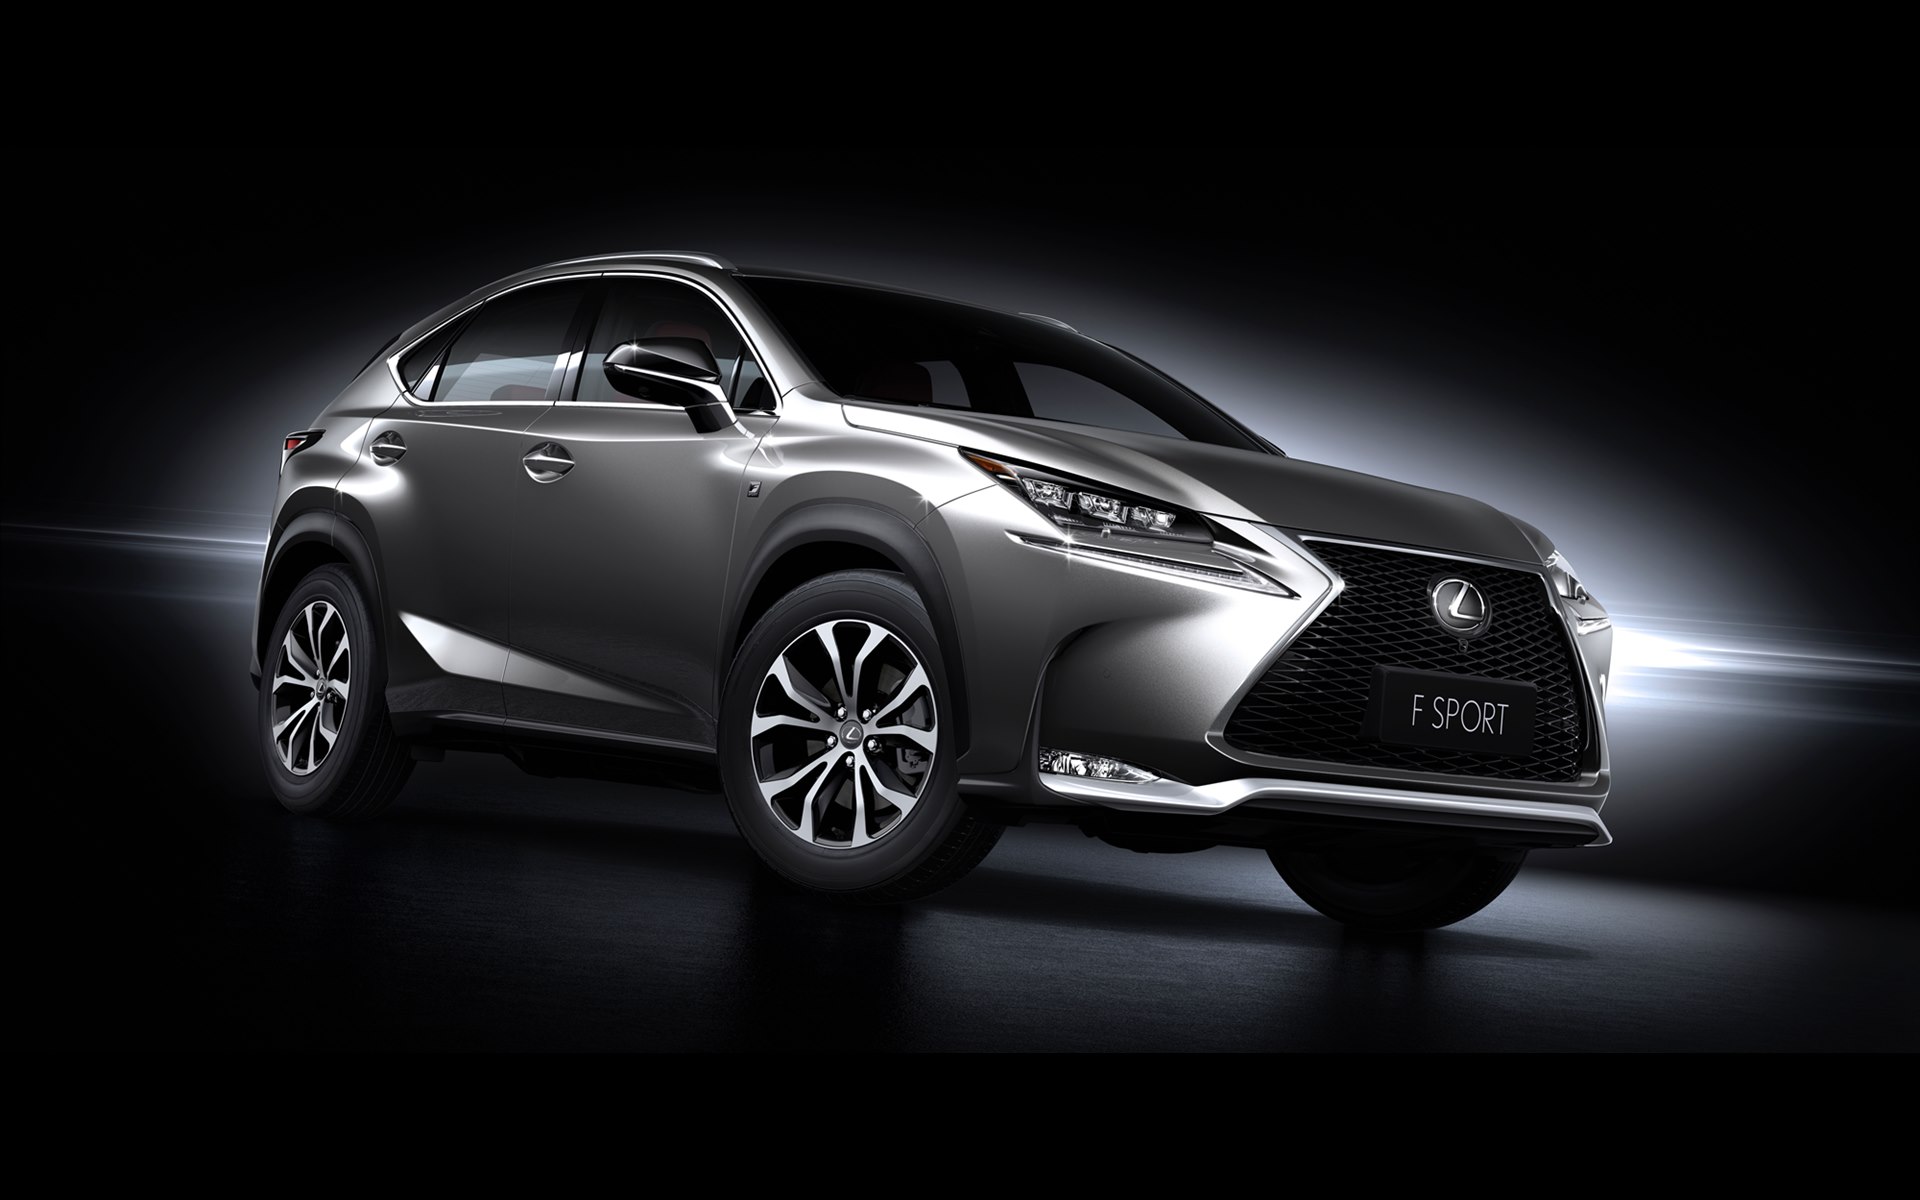 Lexus Nx 200t F Sport 2015 Free Desktop Wallpapers And Background Images